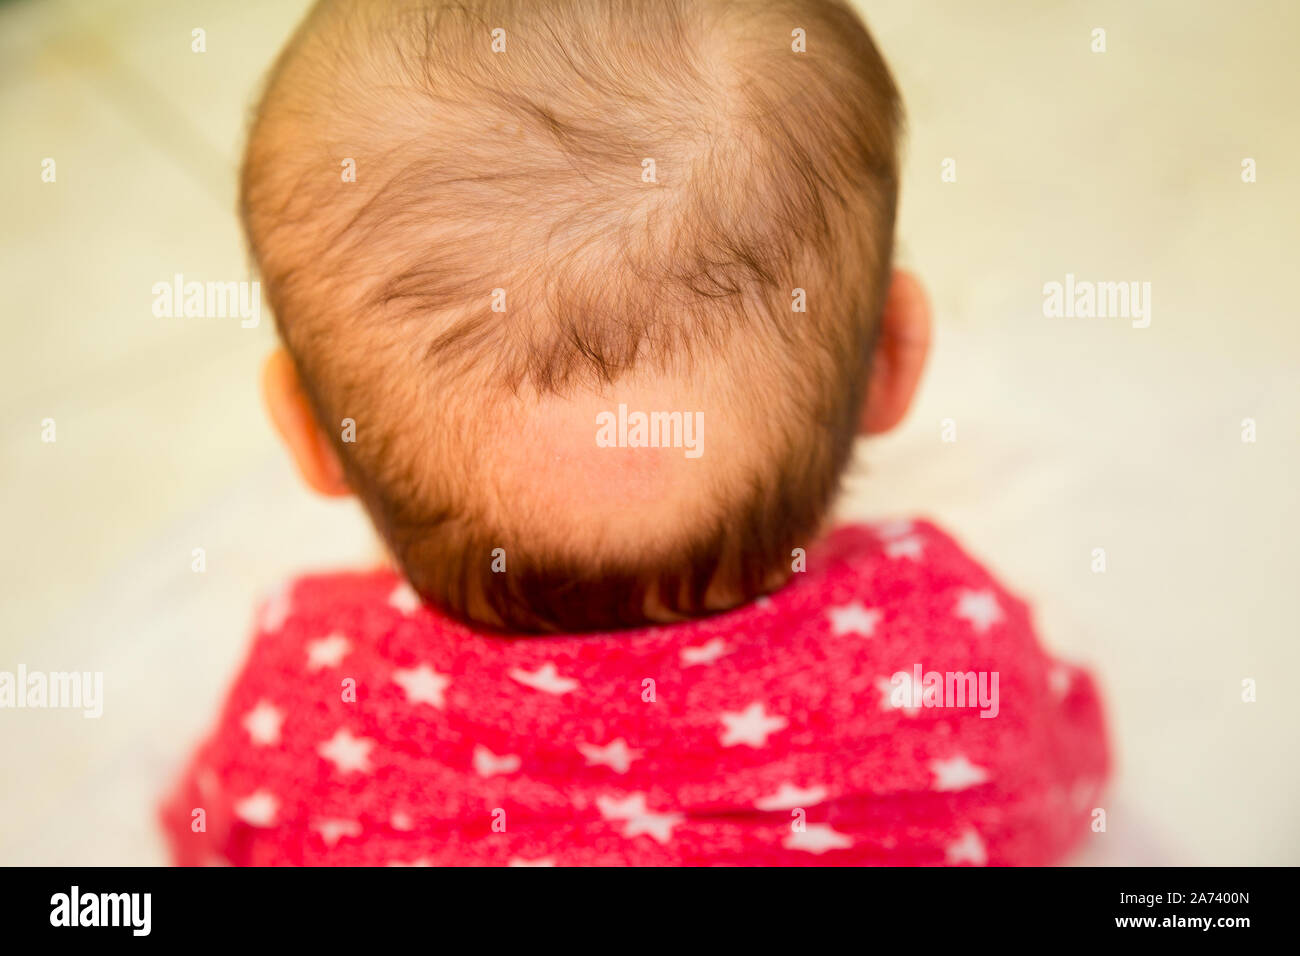 Bald spot on the back of the head of a small baby Stock Photo